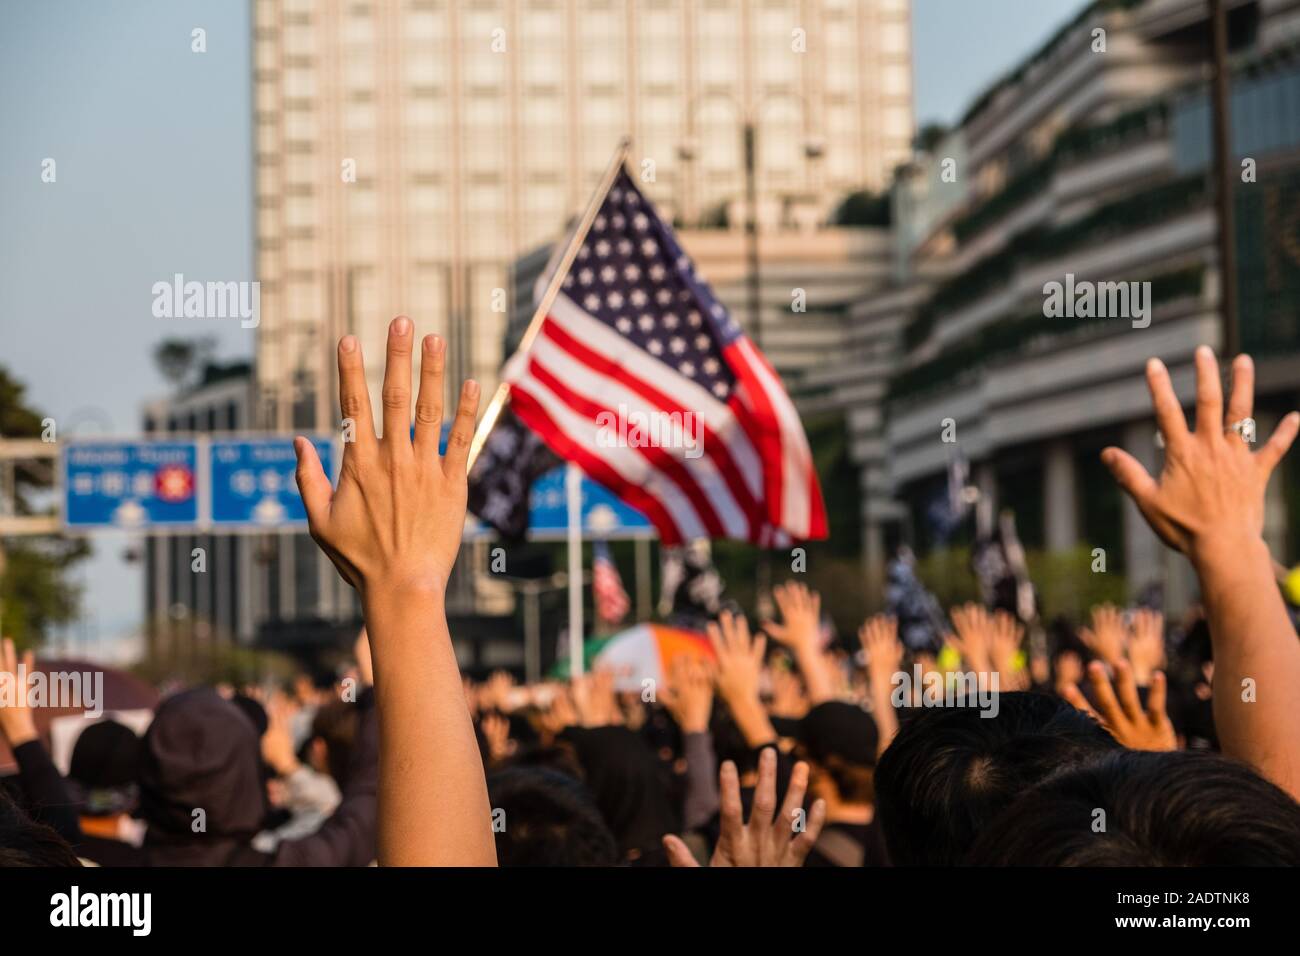 HongKong - December 01, 2019: Crowd of people on demonstration during the 2019 protests in Hongkong holding up hand as symbol for Five Demands Stock Photo